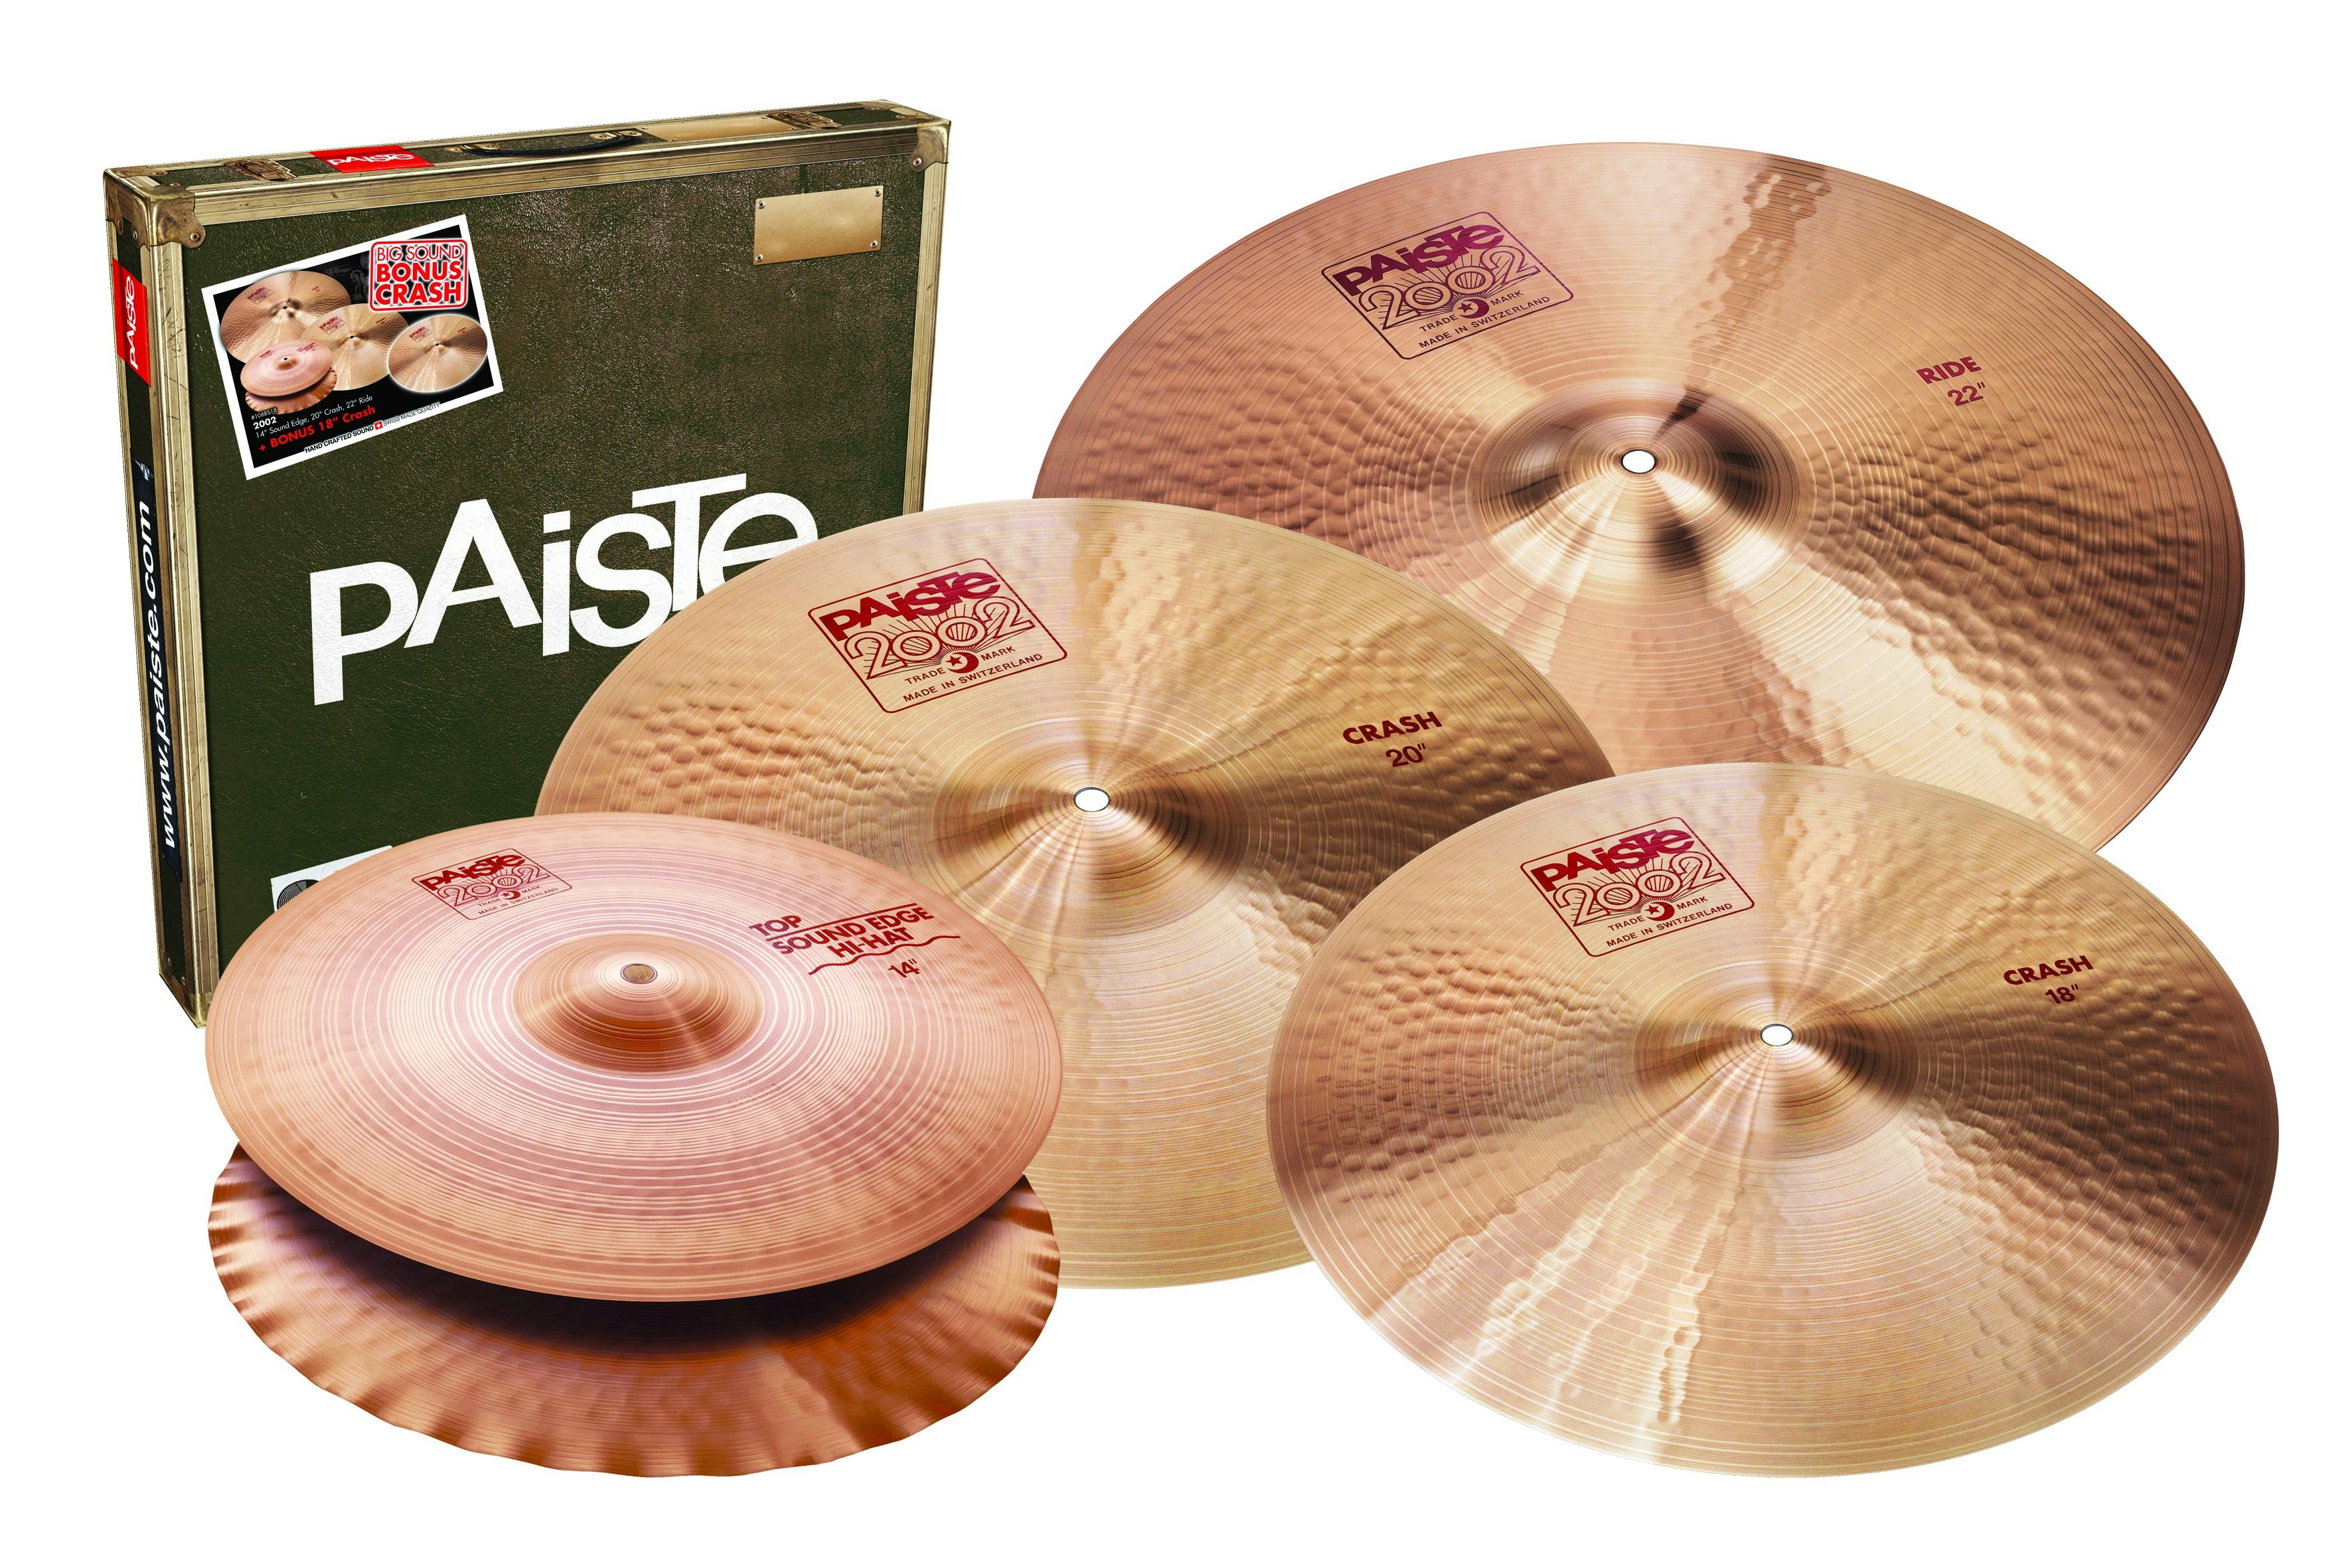 Paiste 2002 Special Edition Box Set - Andertons Music Co.